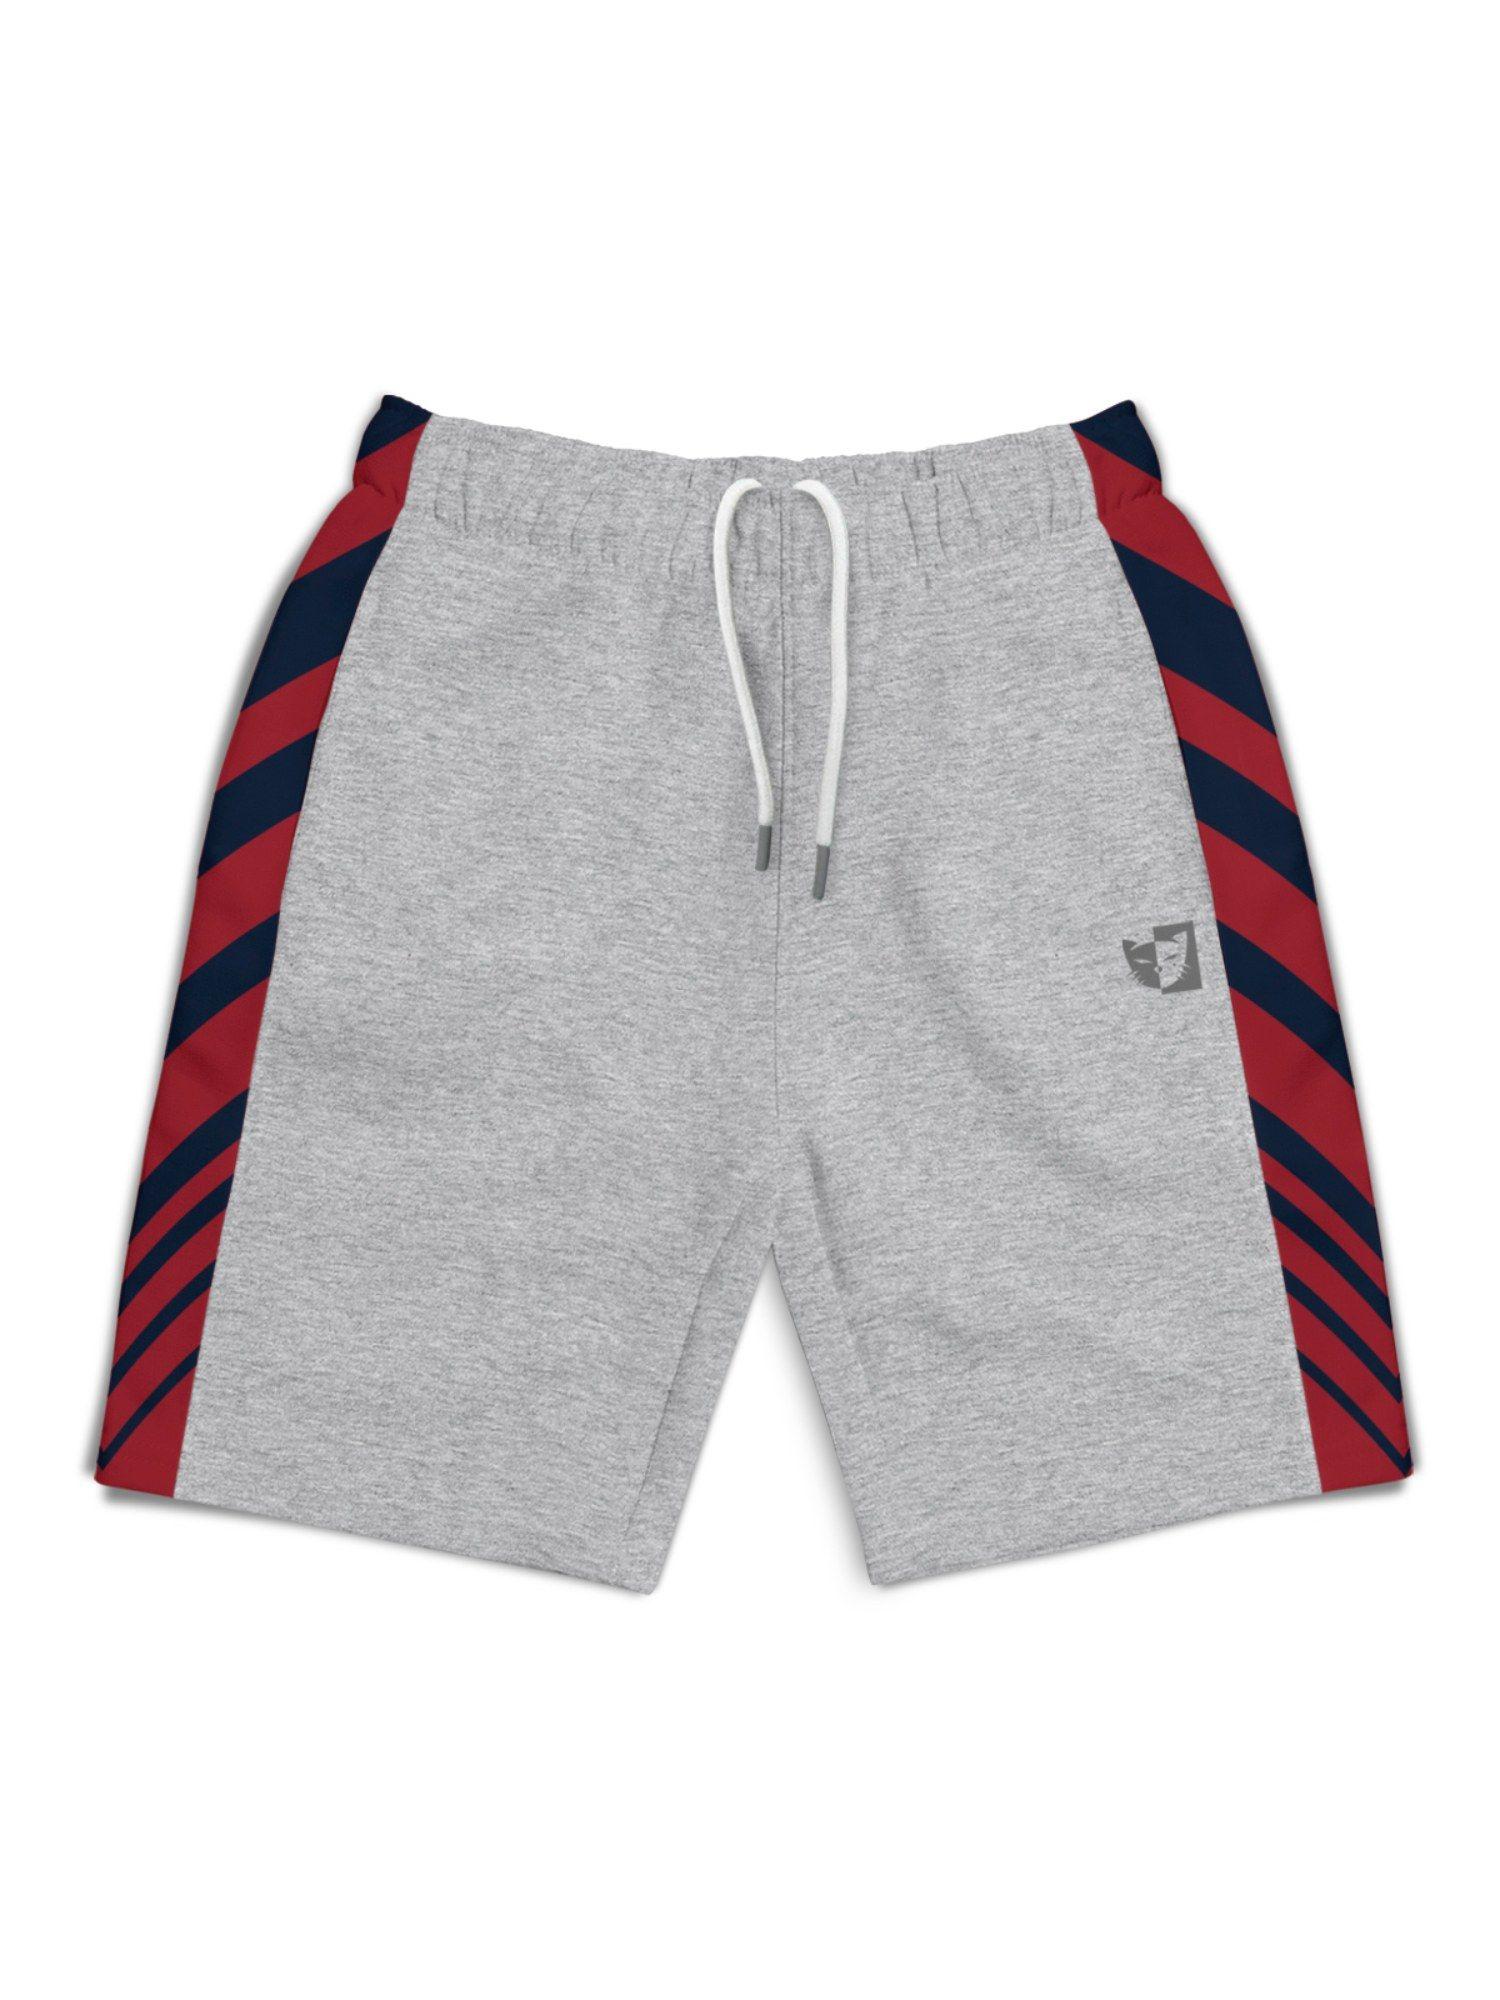 trendy-grey-colorblock-with-branding-printed-shorts